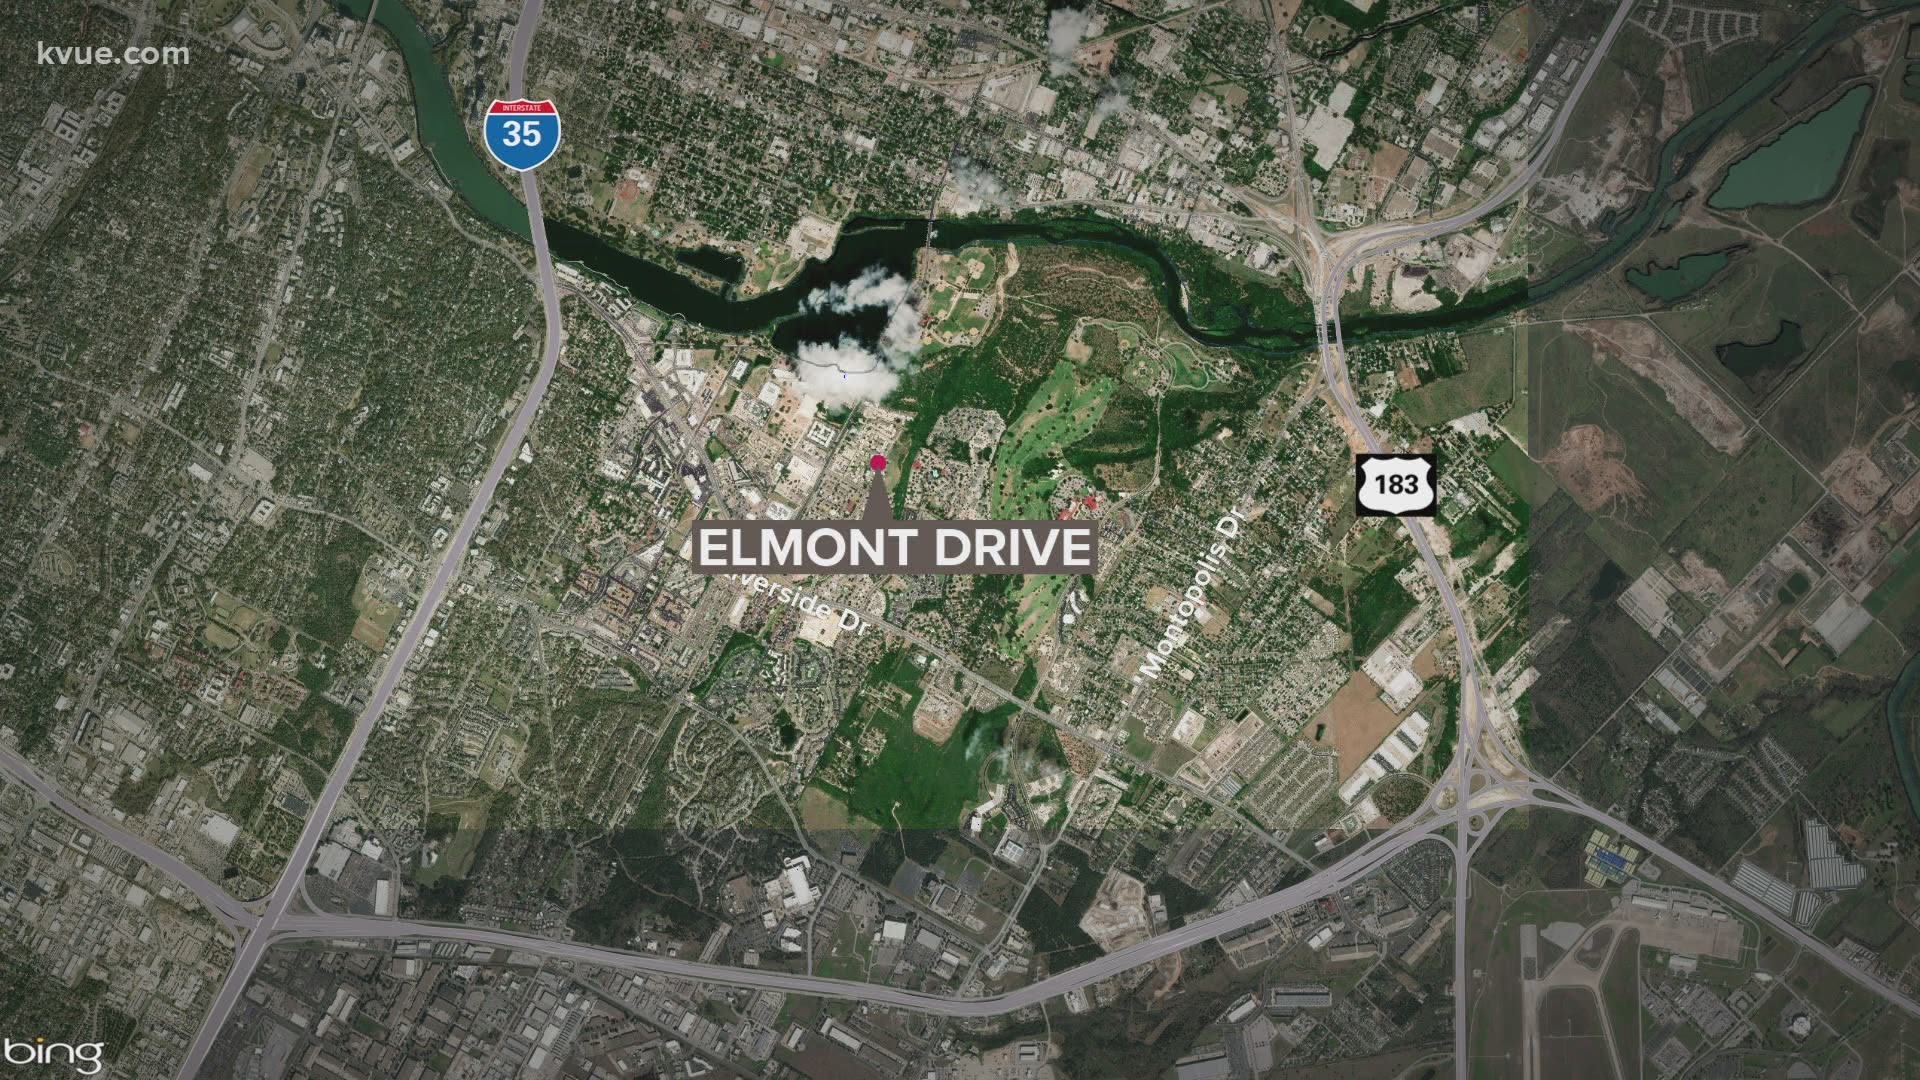 Austin police said two men were shot late Friday night on Elmont Drive near South Pleasant Valley Road.